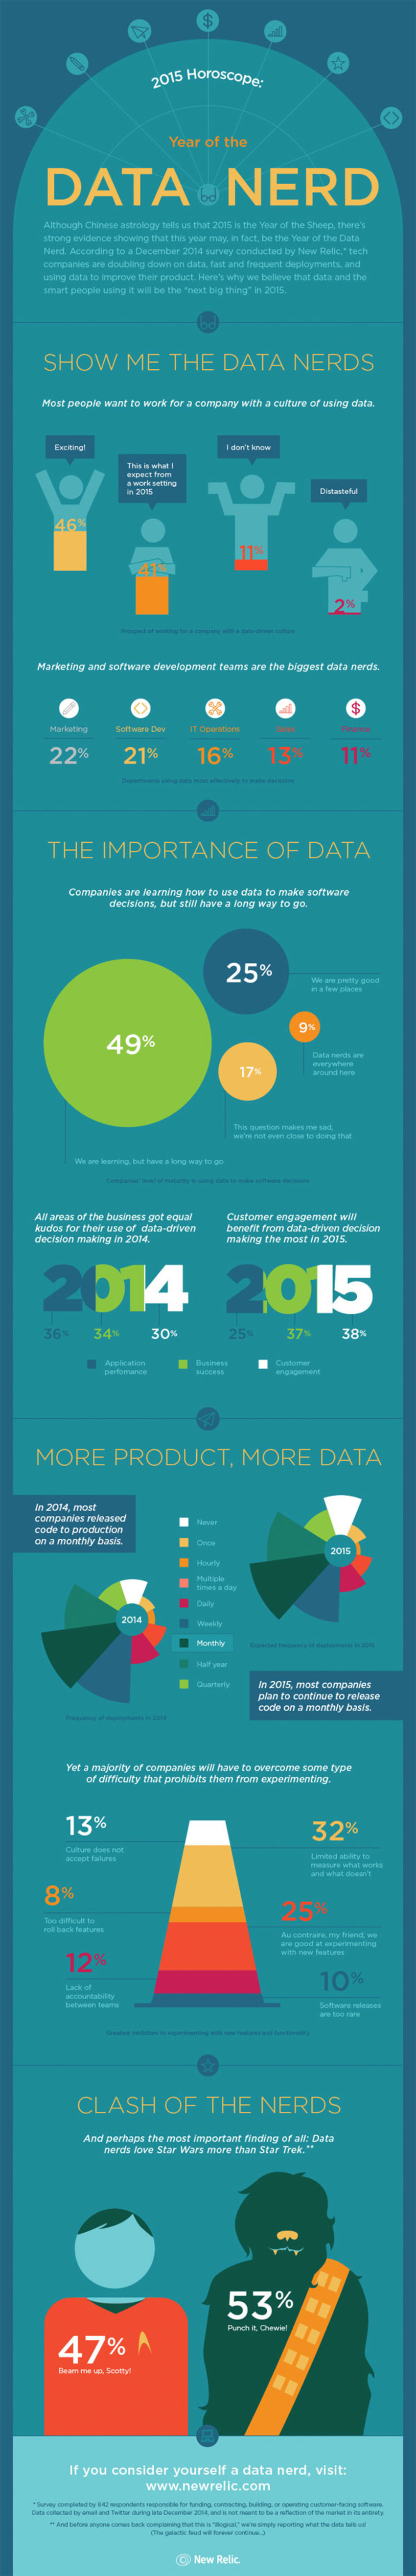 2015: The Year of the Data Nerd [Infographic] - GetElastic | The MarTech Digest | Scoop.it